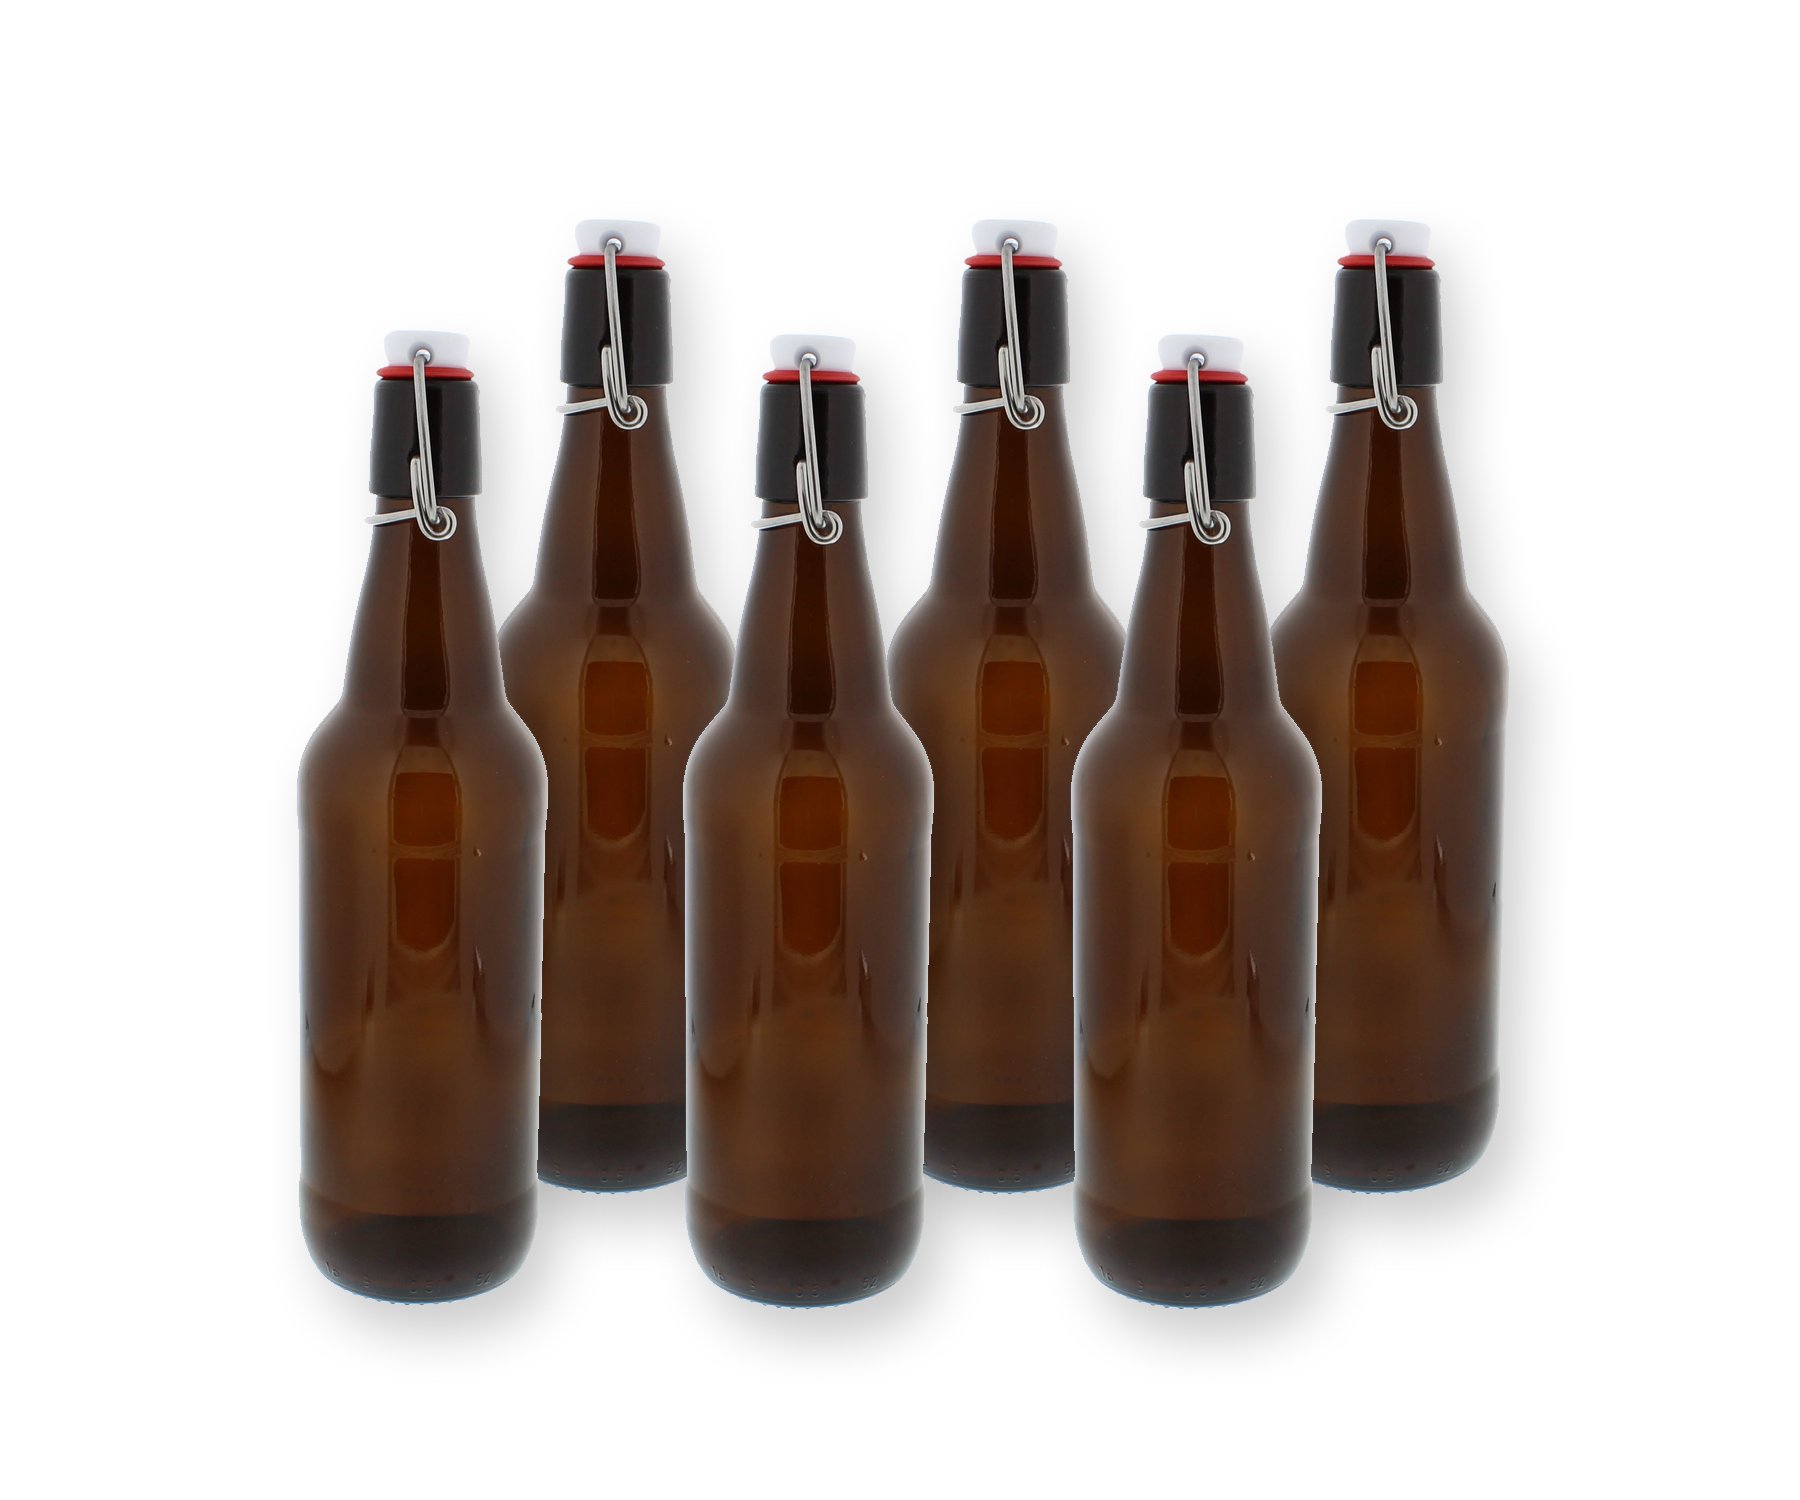 Book Cover Swing Top Bottles w/Caps - 16.9oz, Amber Glass, Reusable for Homebrew - 6 pack